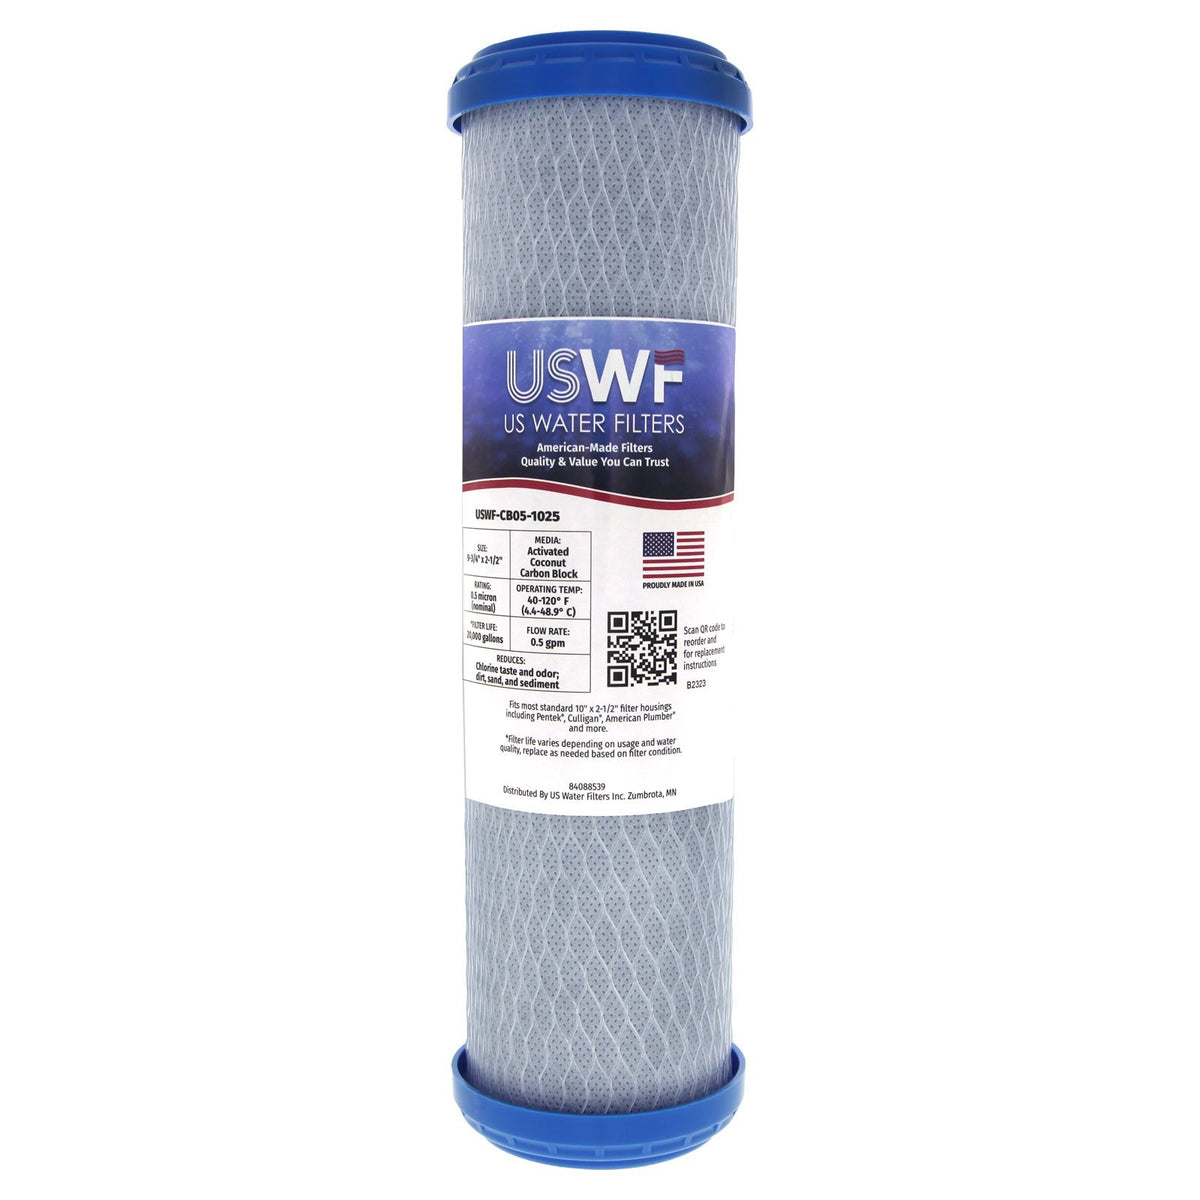 Coconut Carbon Block Filter by USWF 0.5 Micron 10&quot;x2.5&quot;